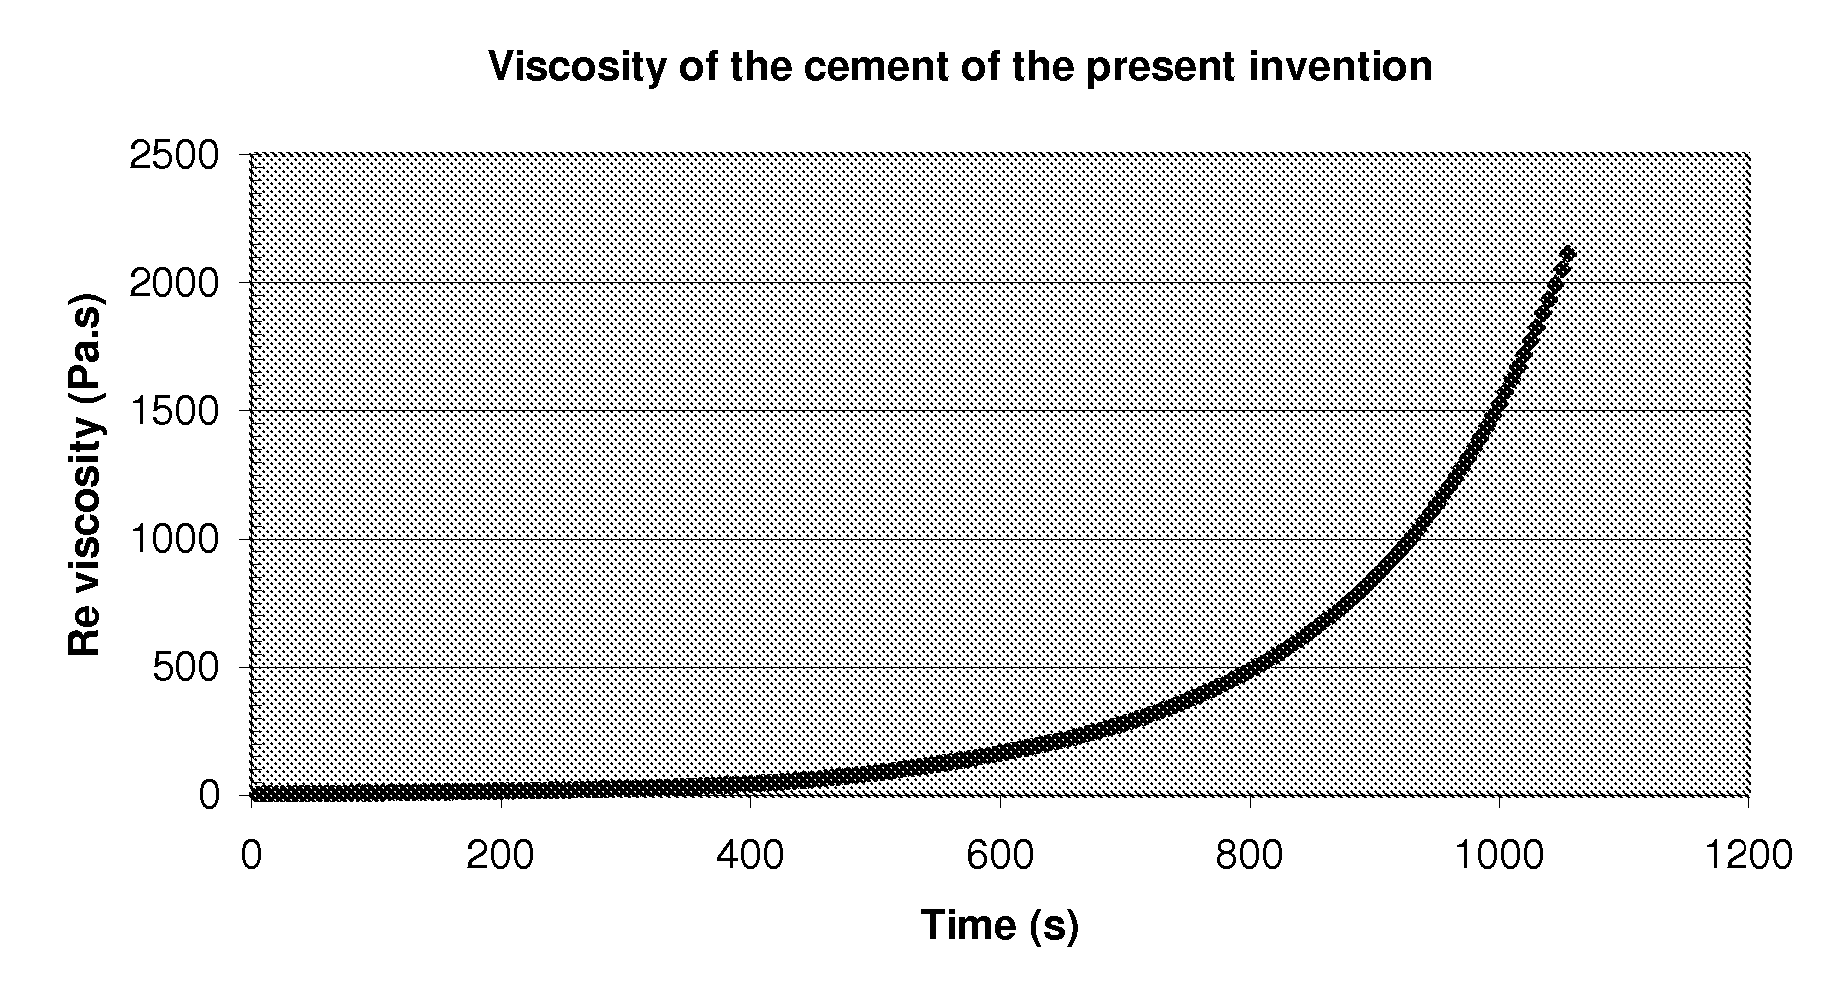 Polymer cement for percutaneous vertebroplasty and methods of using and making same